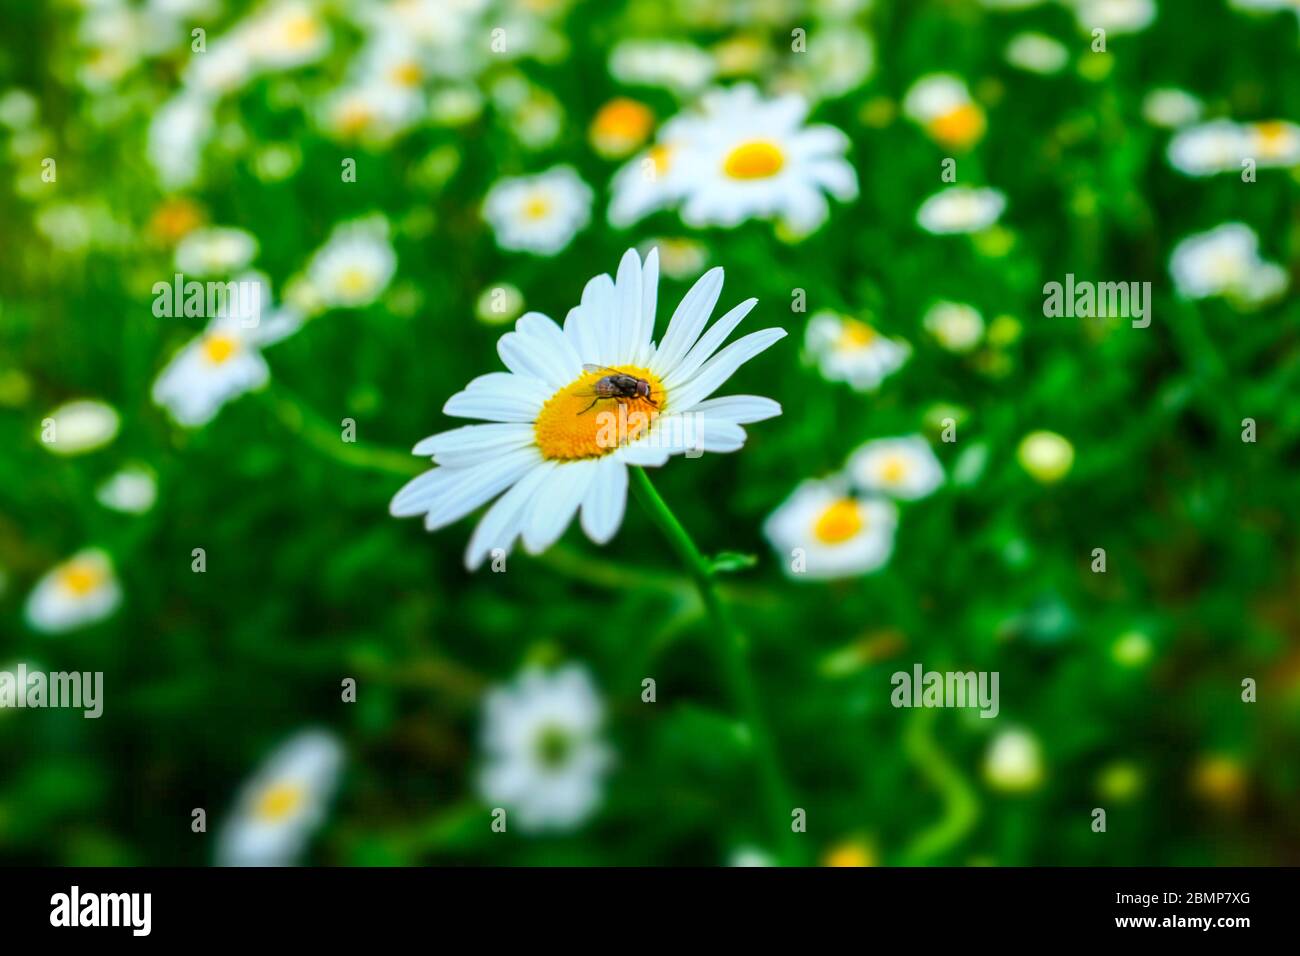 One daisy flower with a fly on it and very blurred other daisies and greenery in the background, Sa Pa, Vietnam Stock Photo